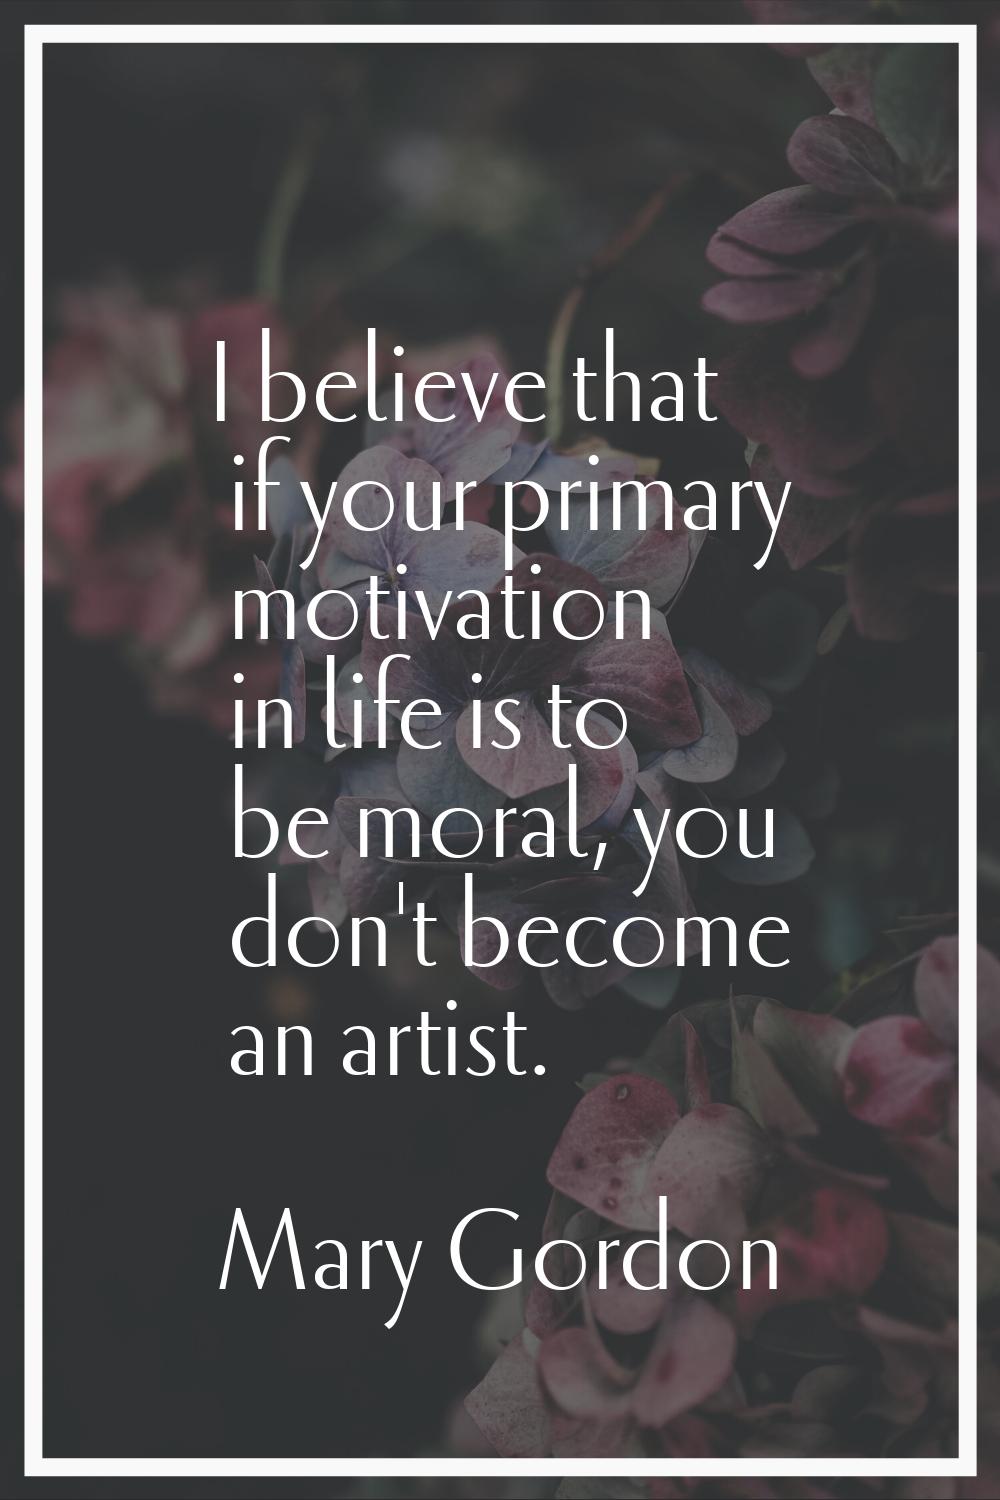 I believe that if your primary motivation in life is to be moral, you don't become an artist.